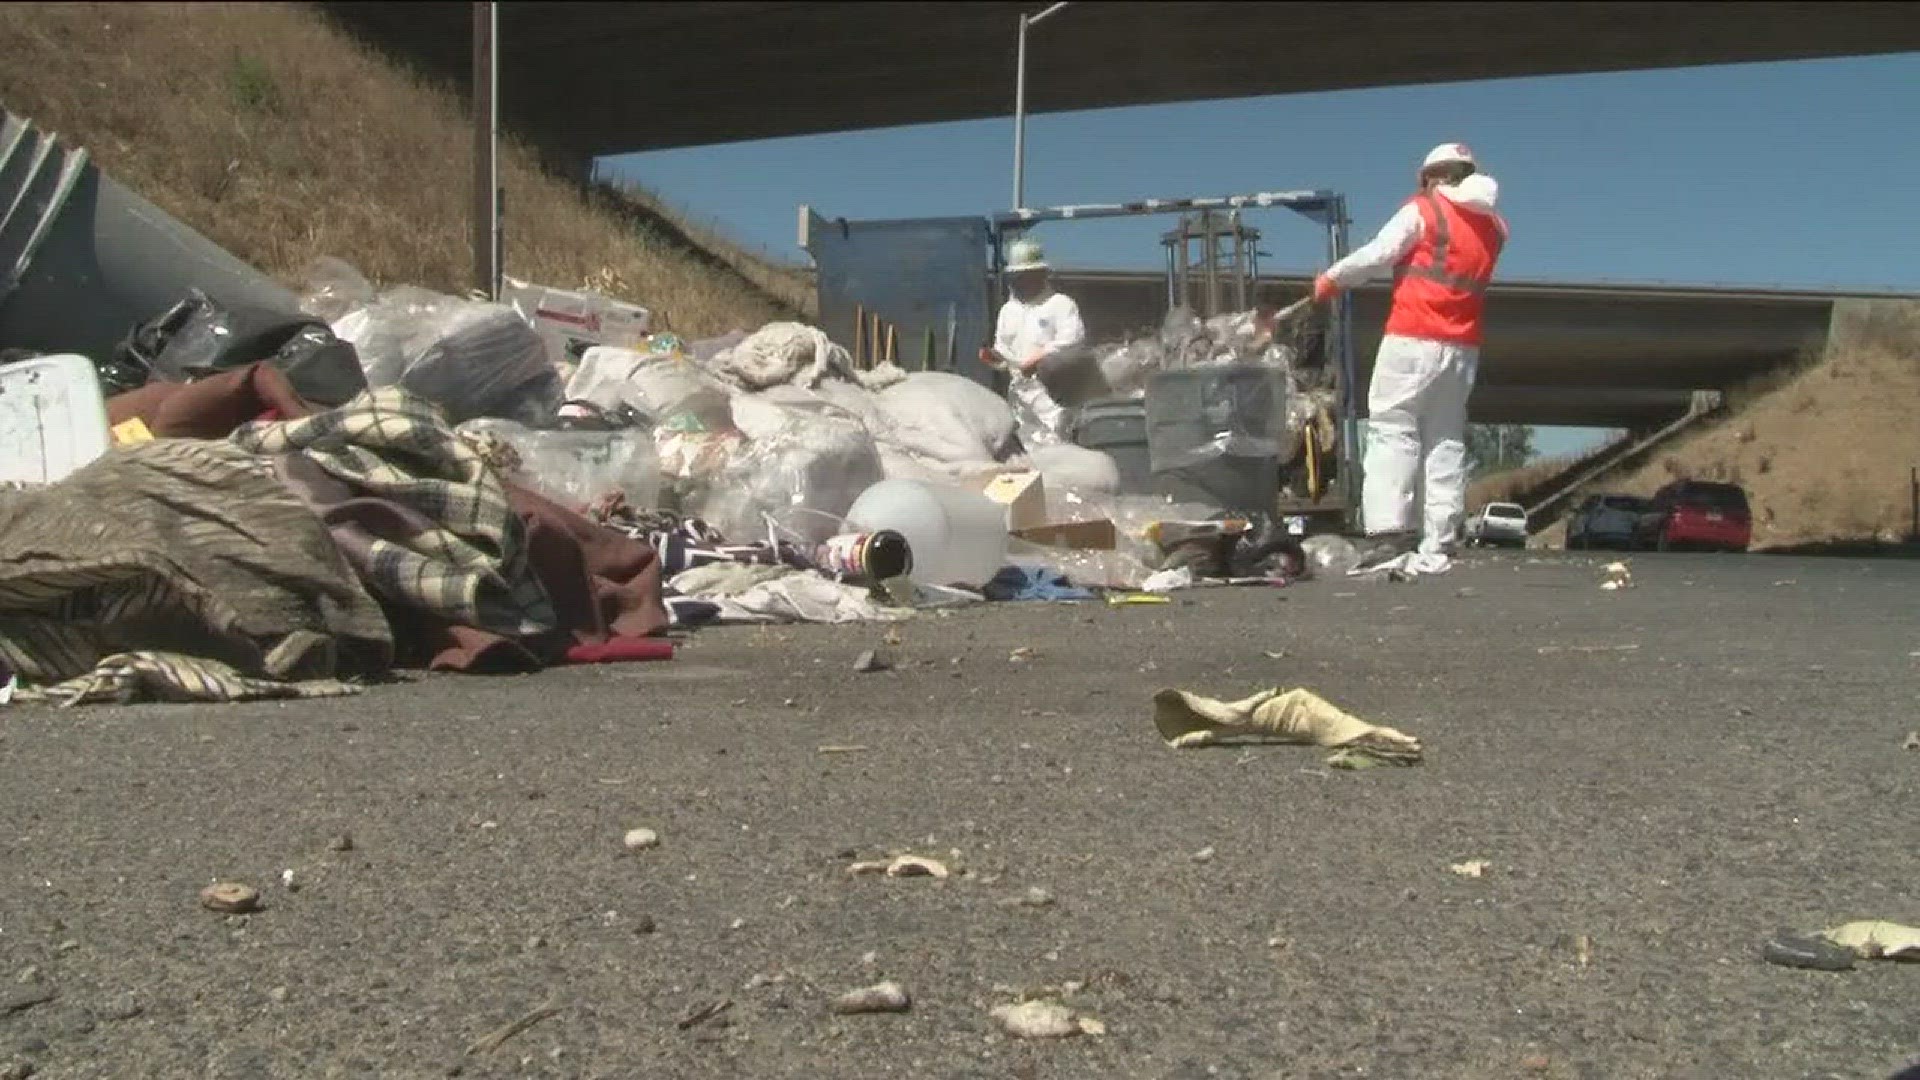 Caltrans cleans up homeless camps in Stockton